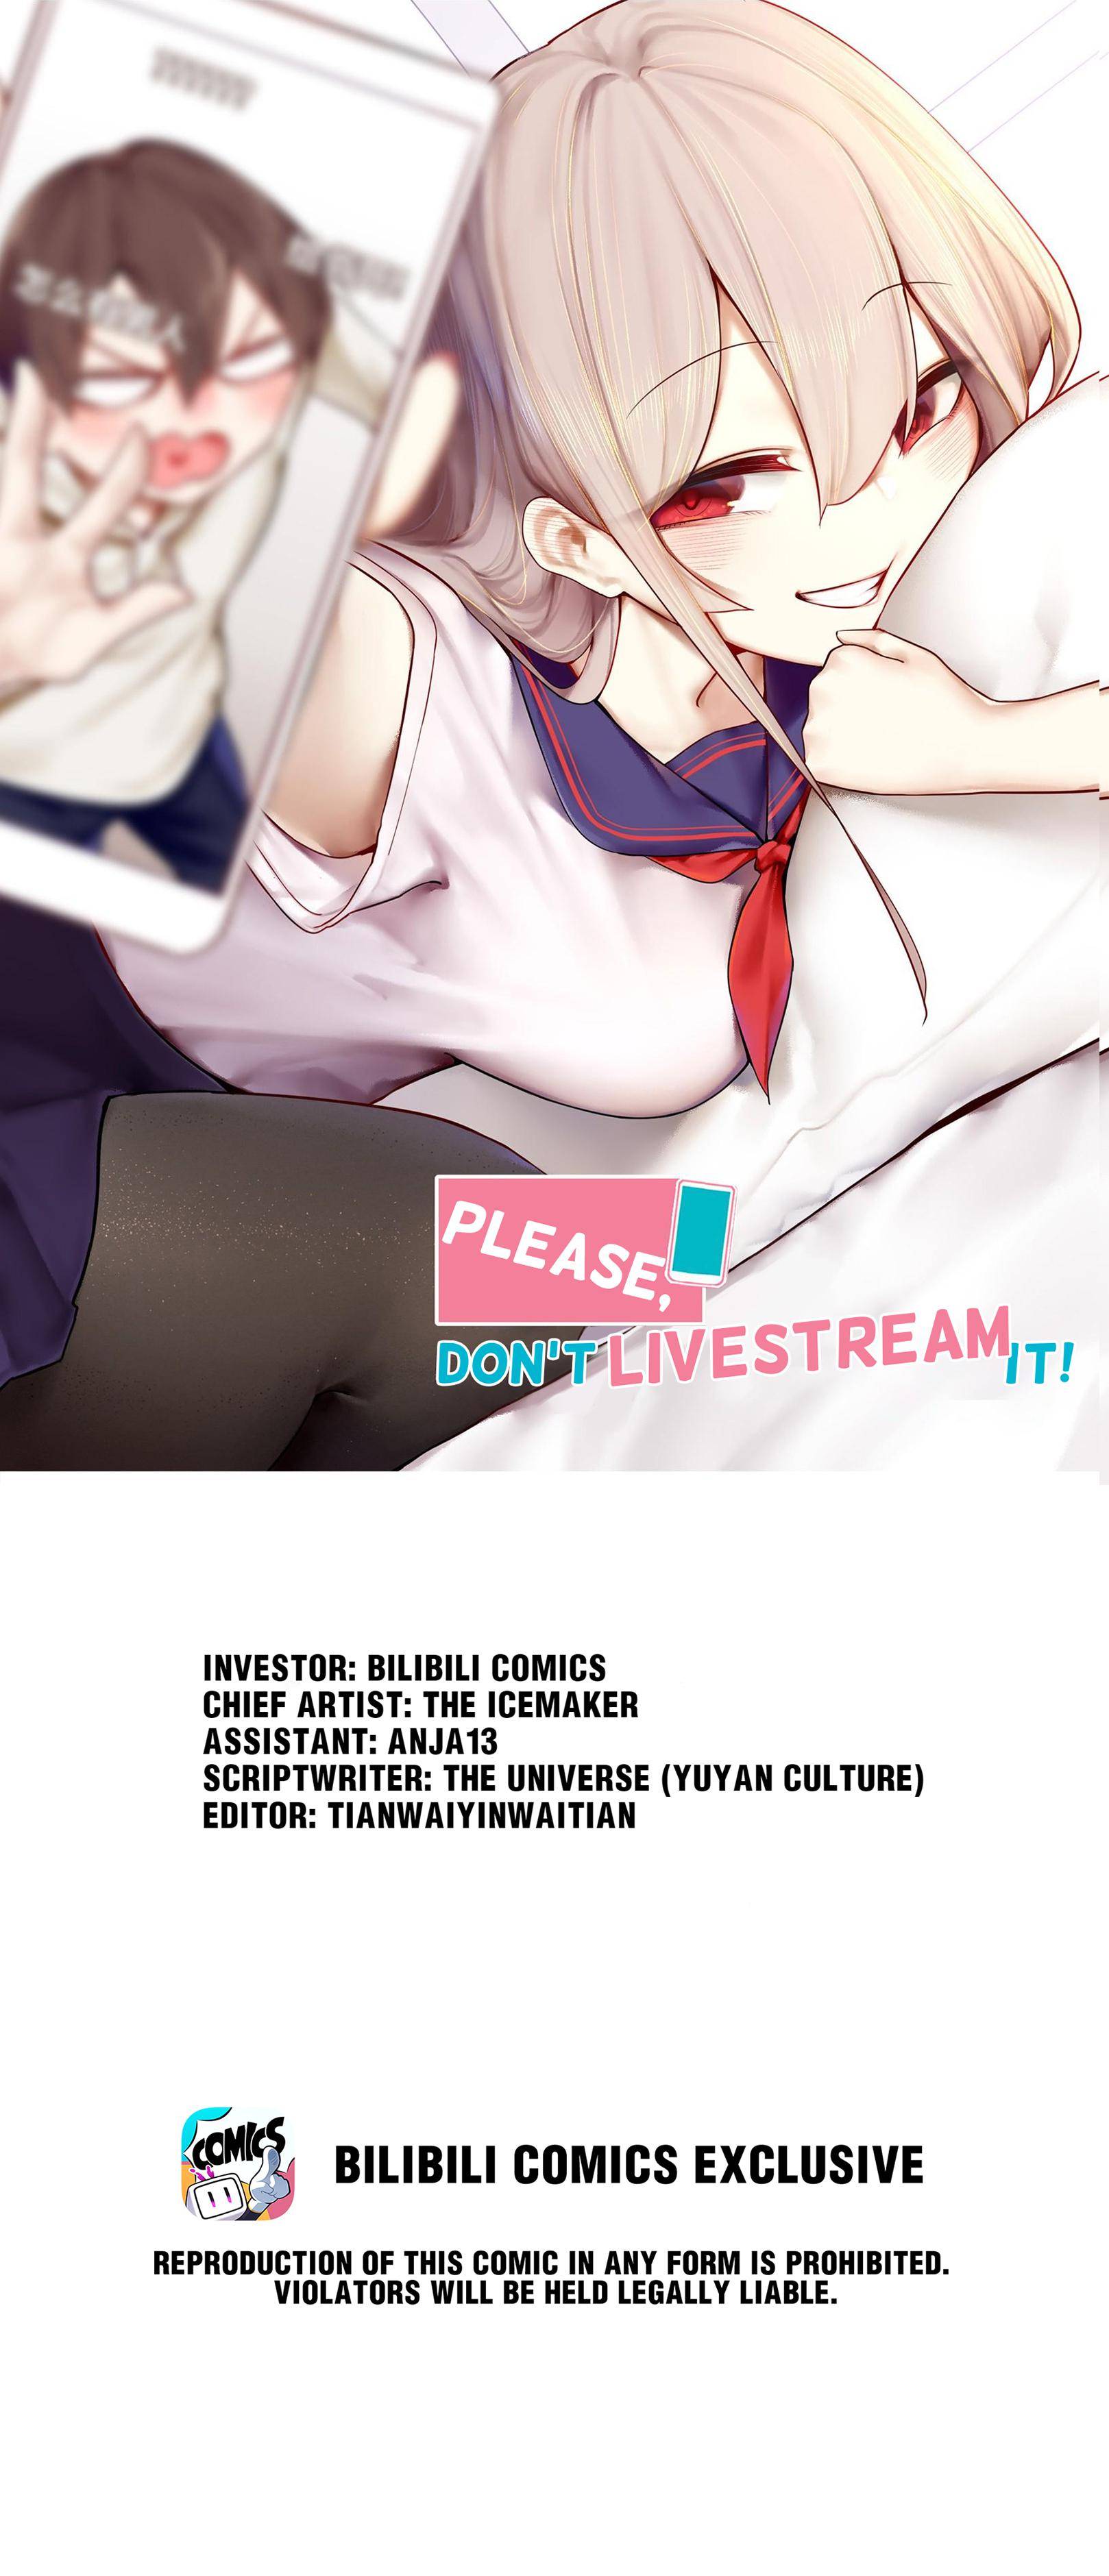 Miss, don't livestream it! - chapter 27.1 - #1